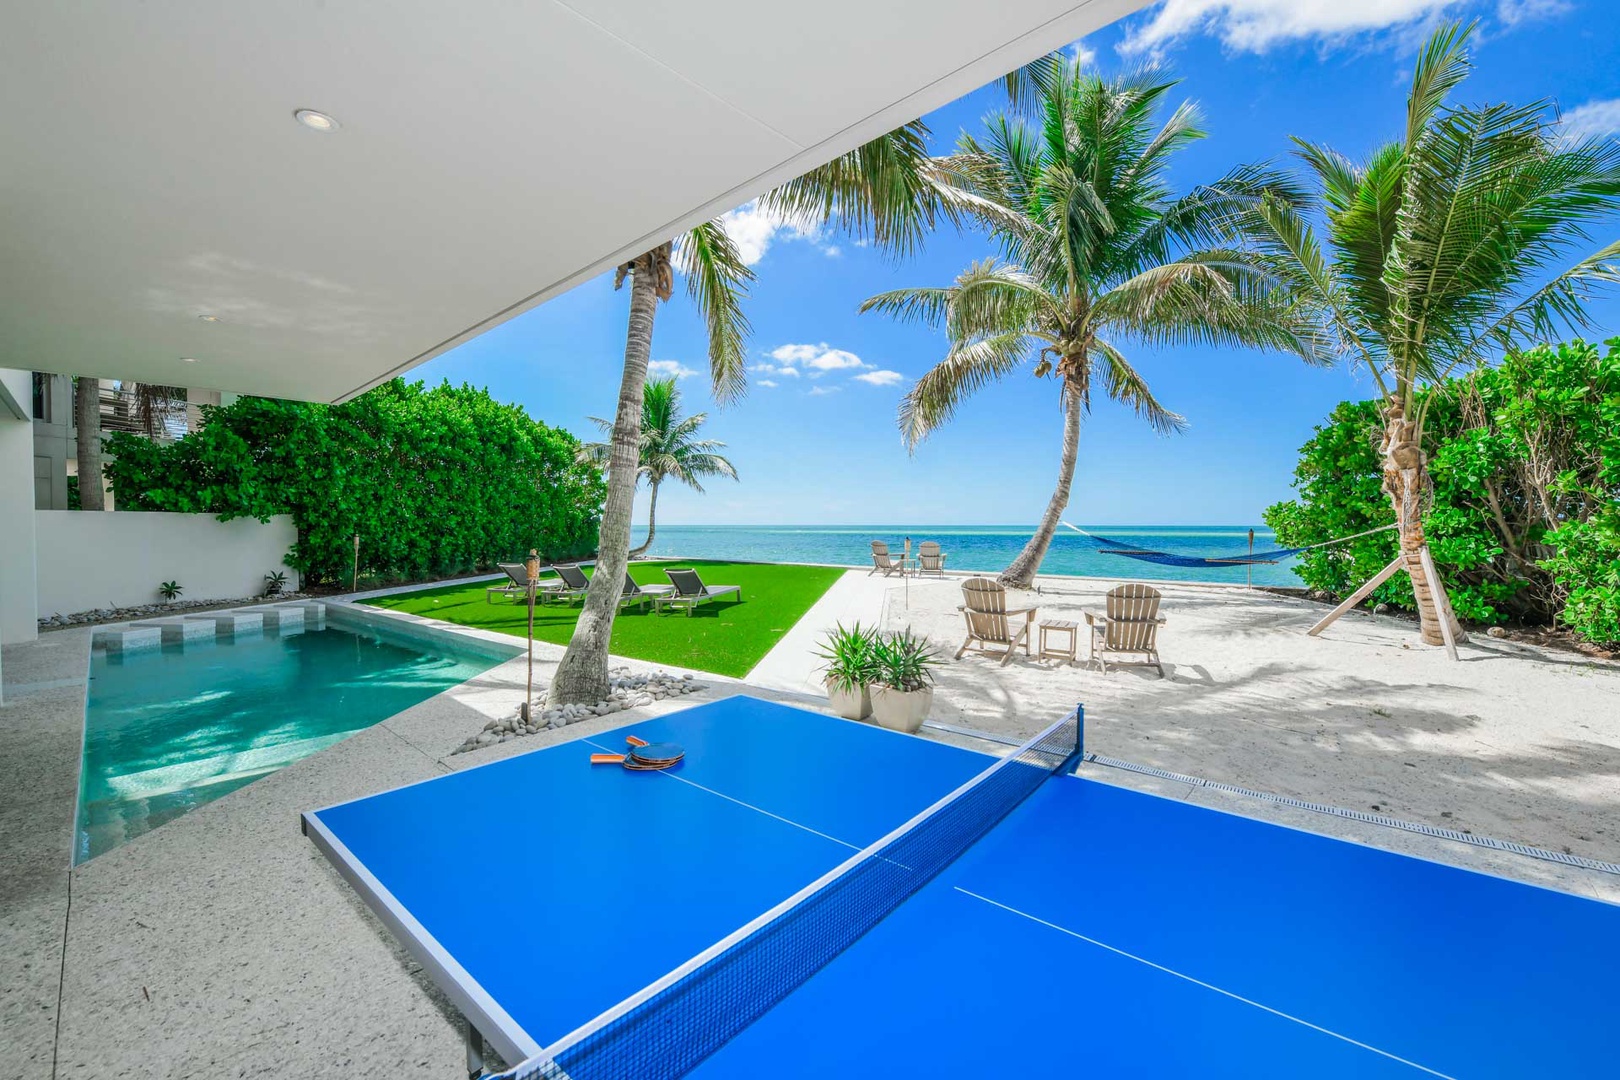 Ping Pong, Pool, Private Beach, Oh My!